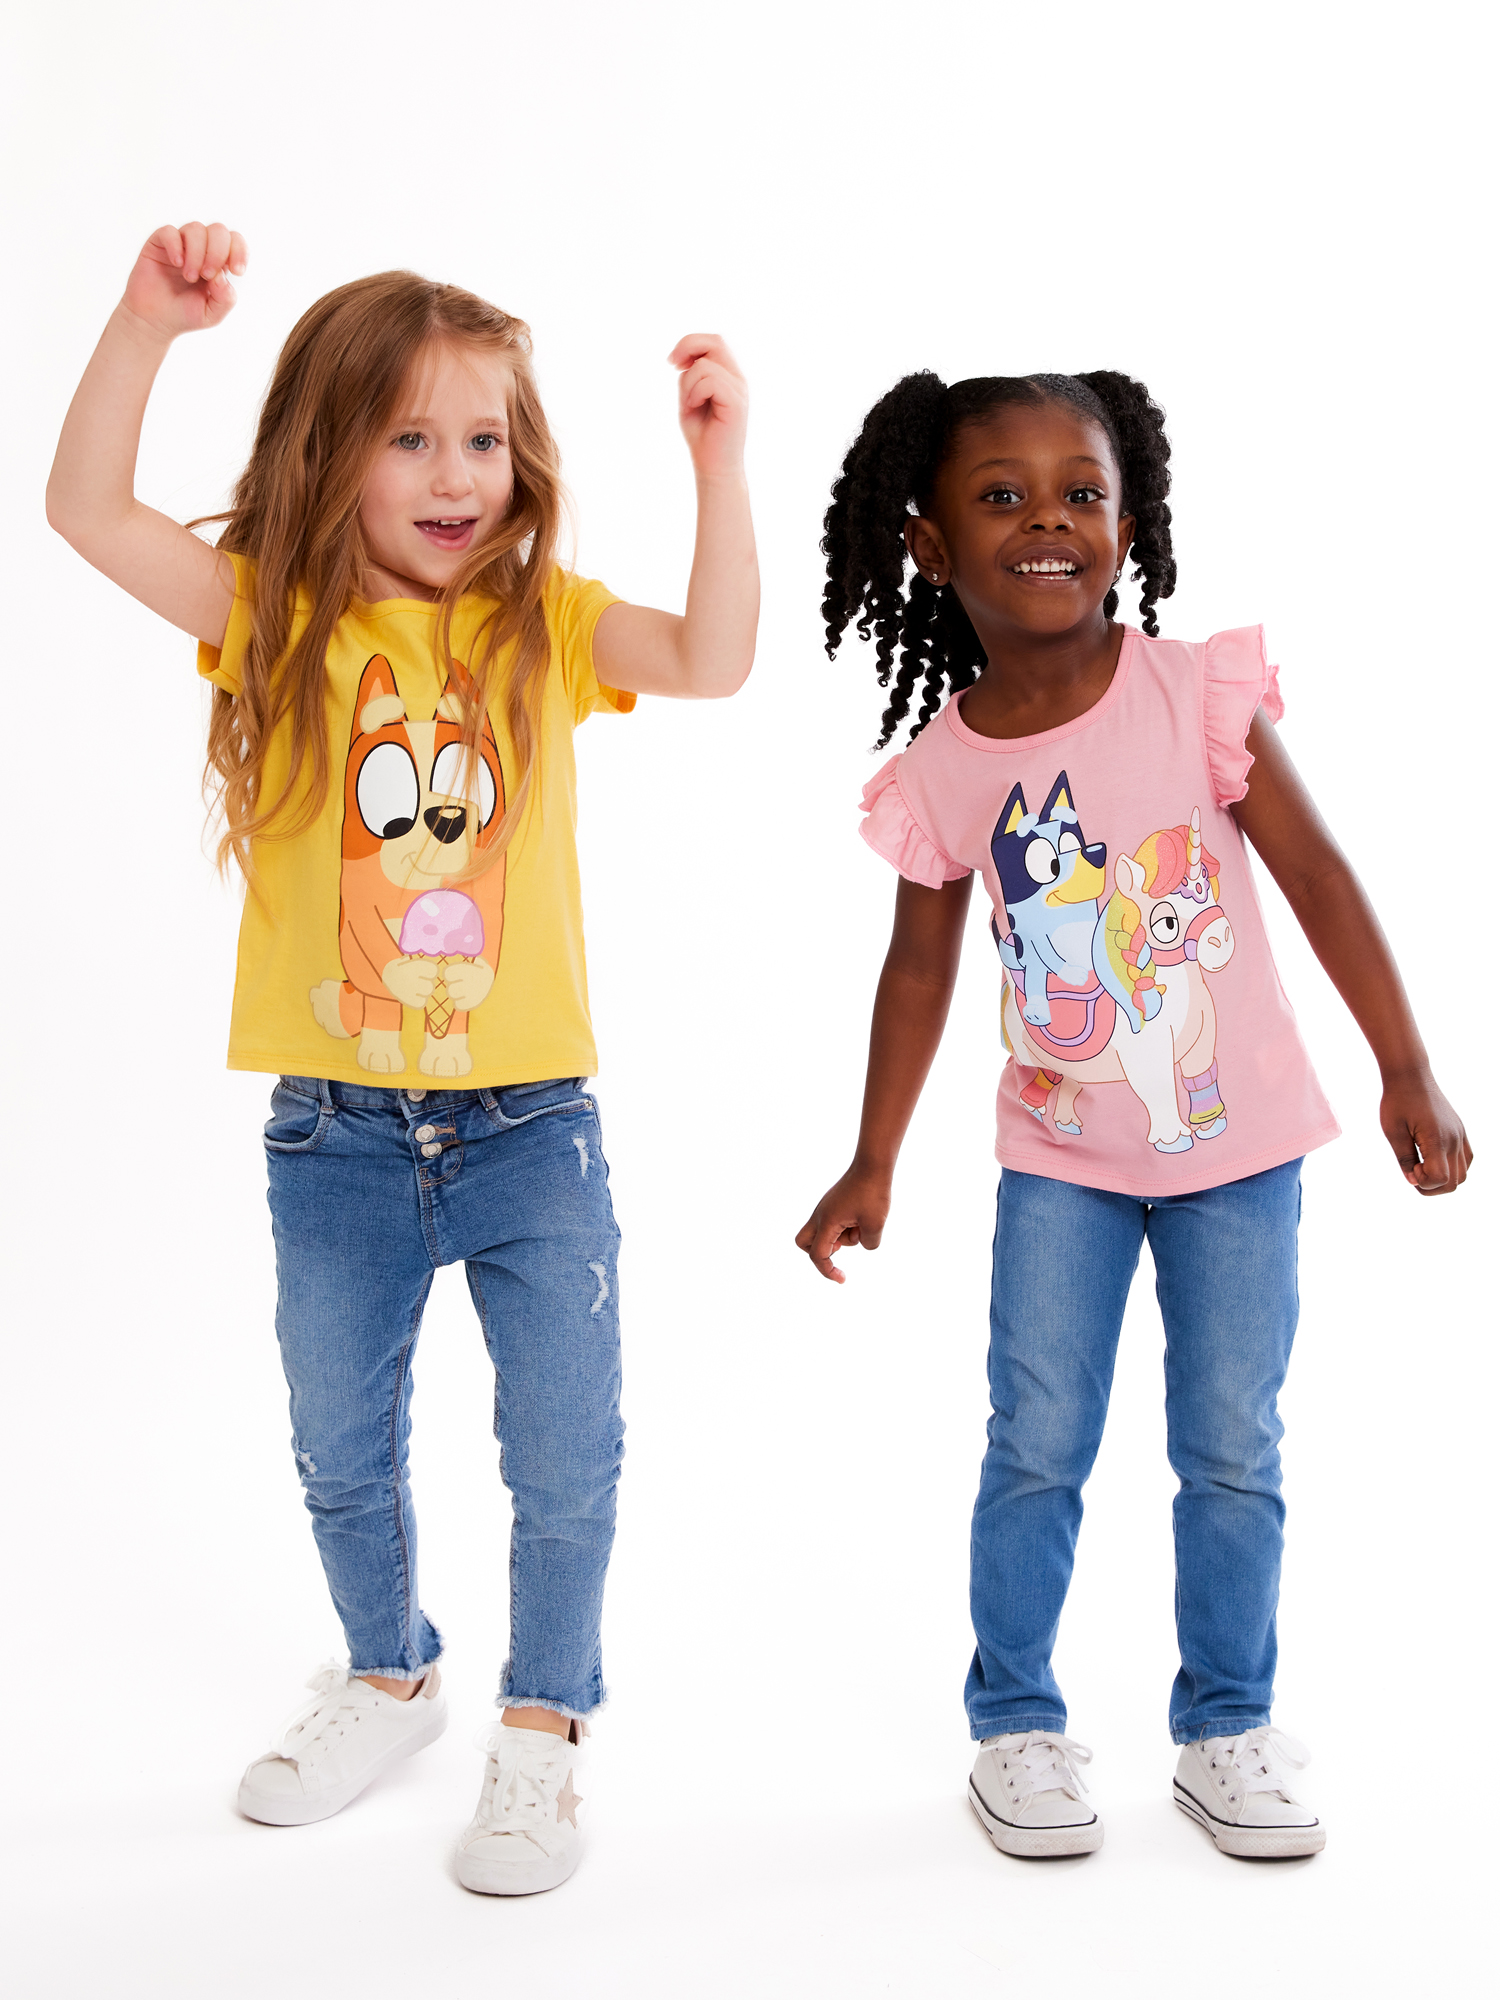 Bluey Toddler Girl Graphic Print Fashion T-Shirts, 4-Pack, Sizes 2T-5T - image 5 of 14